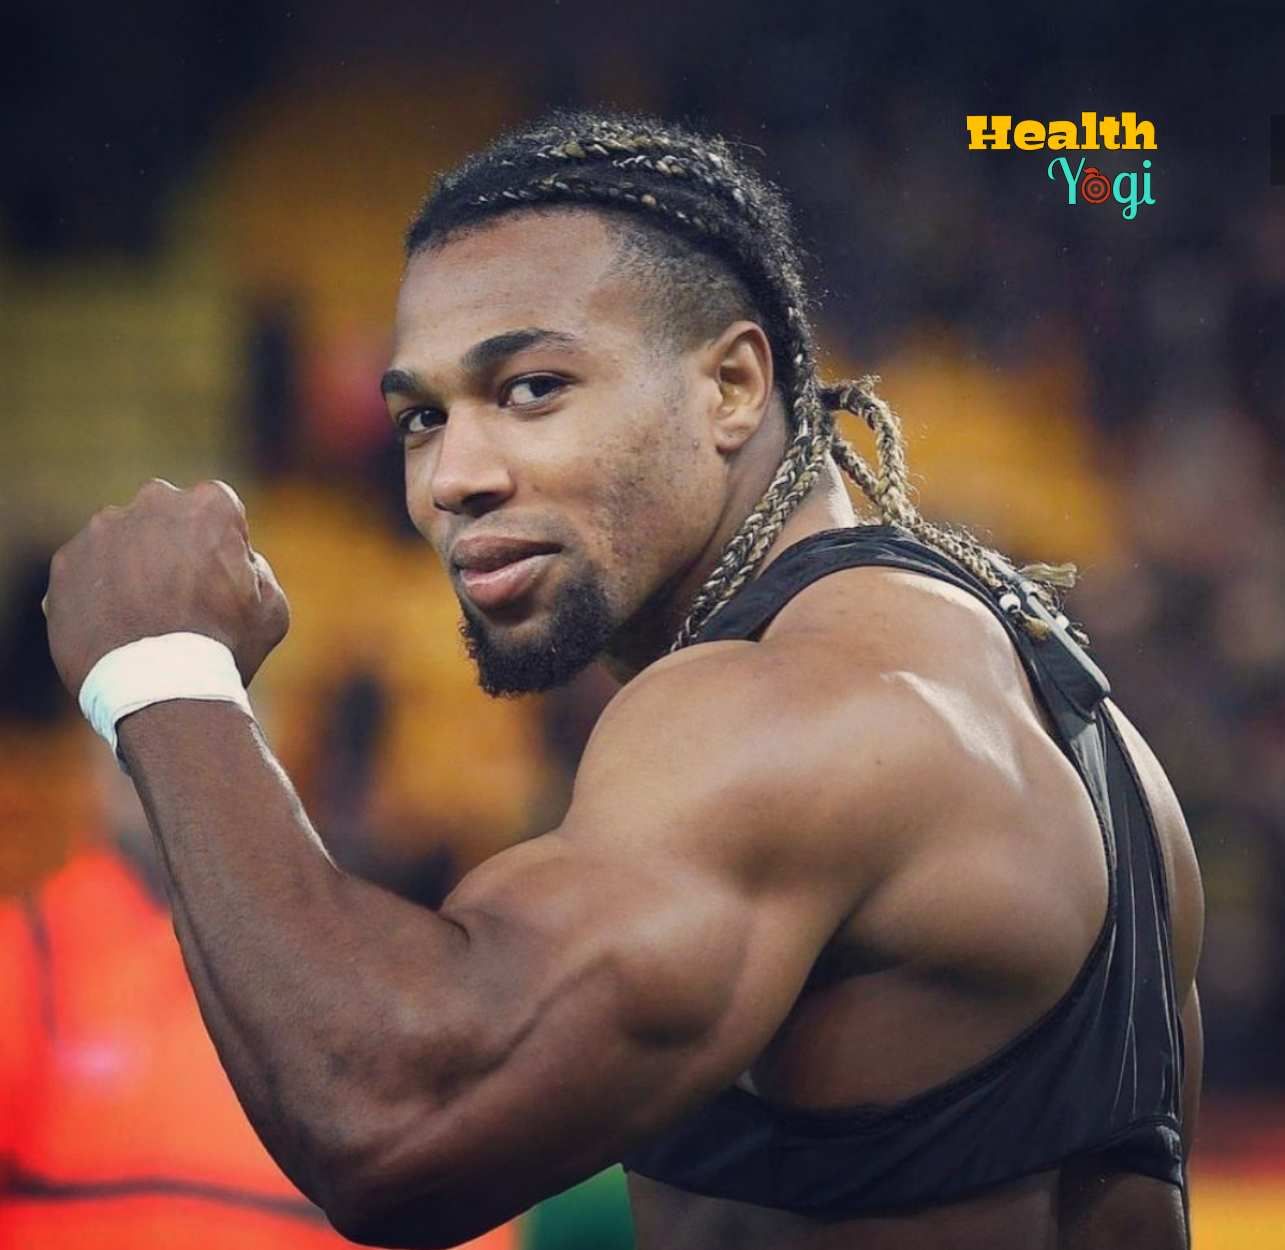 Adama Traore Workout Routine And Diet Plan in 2020